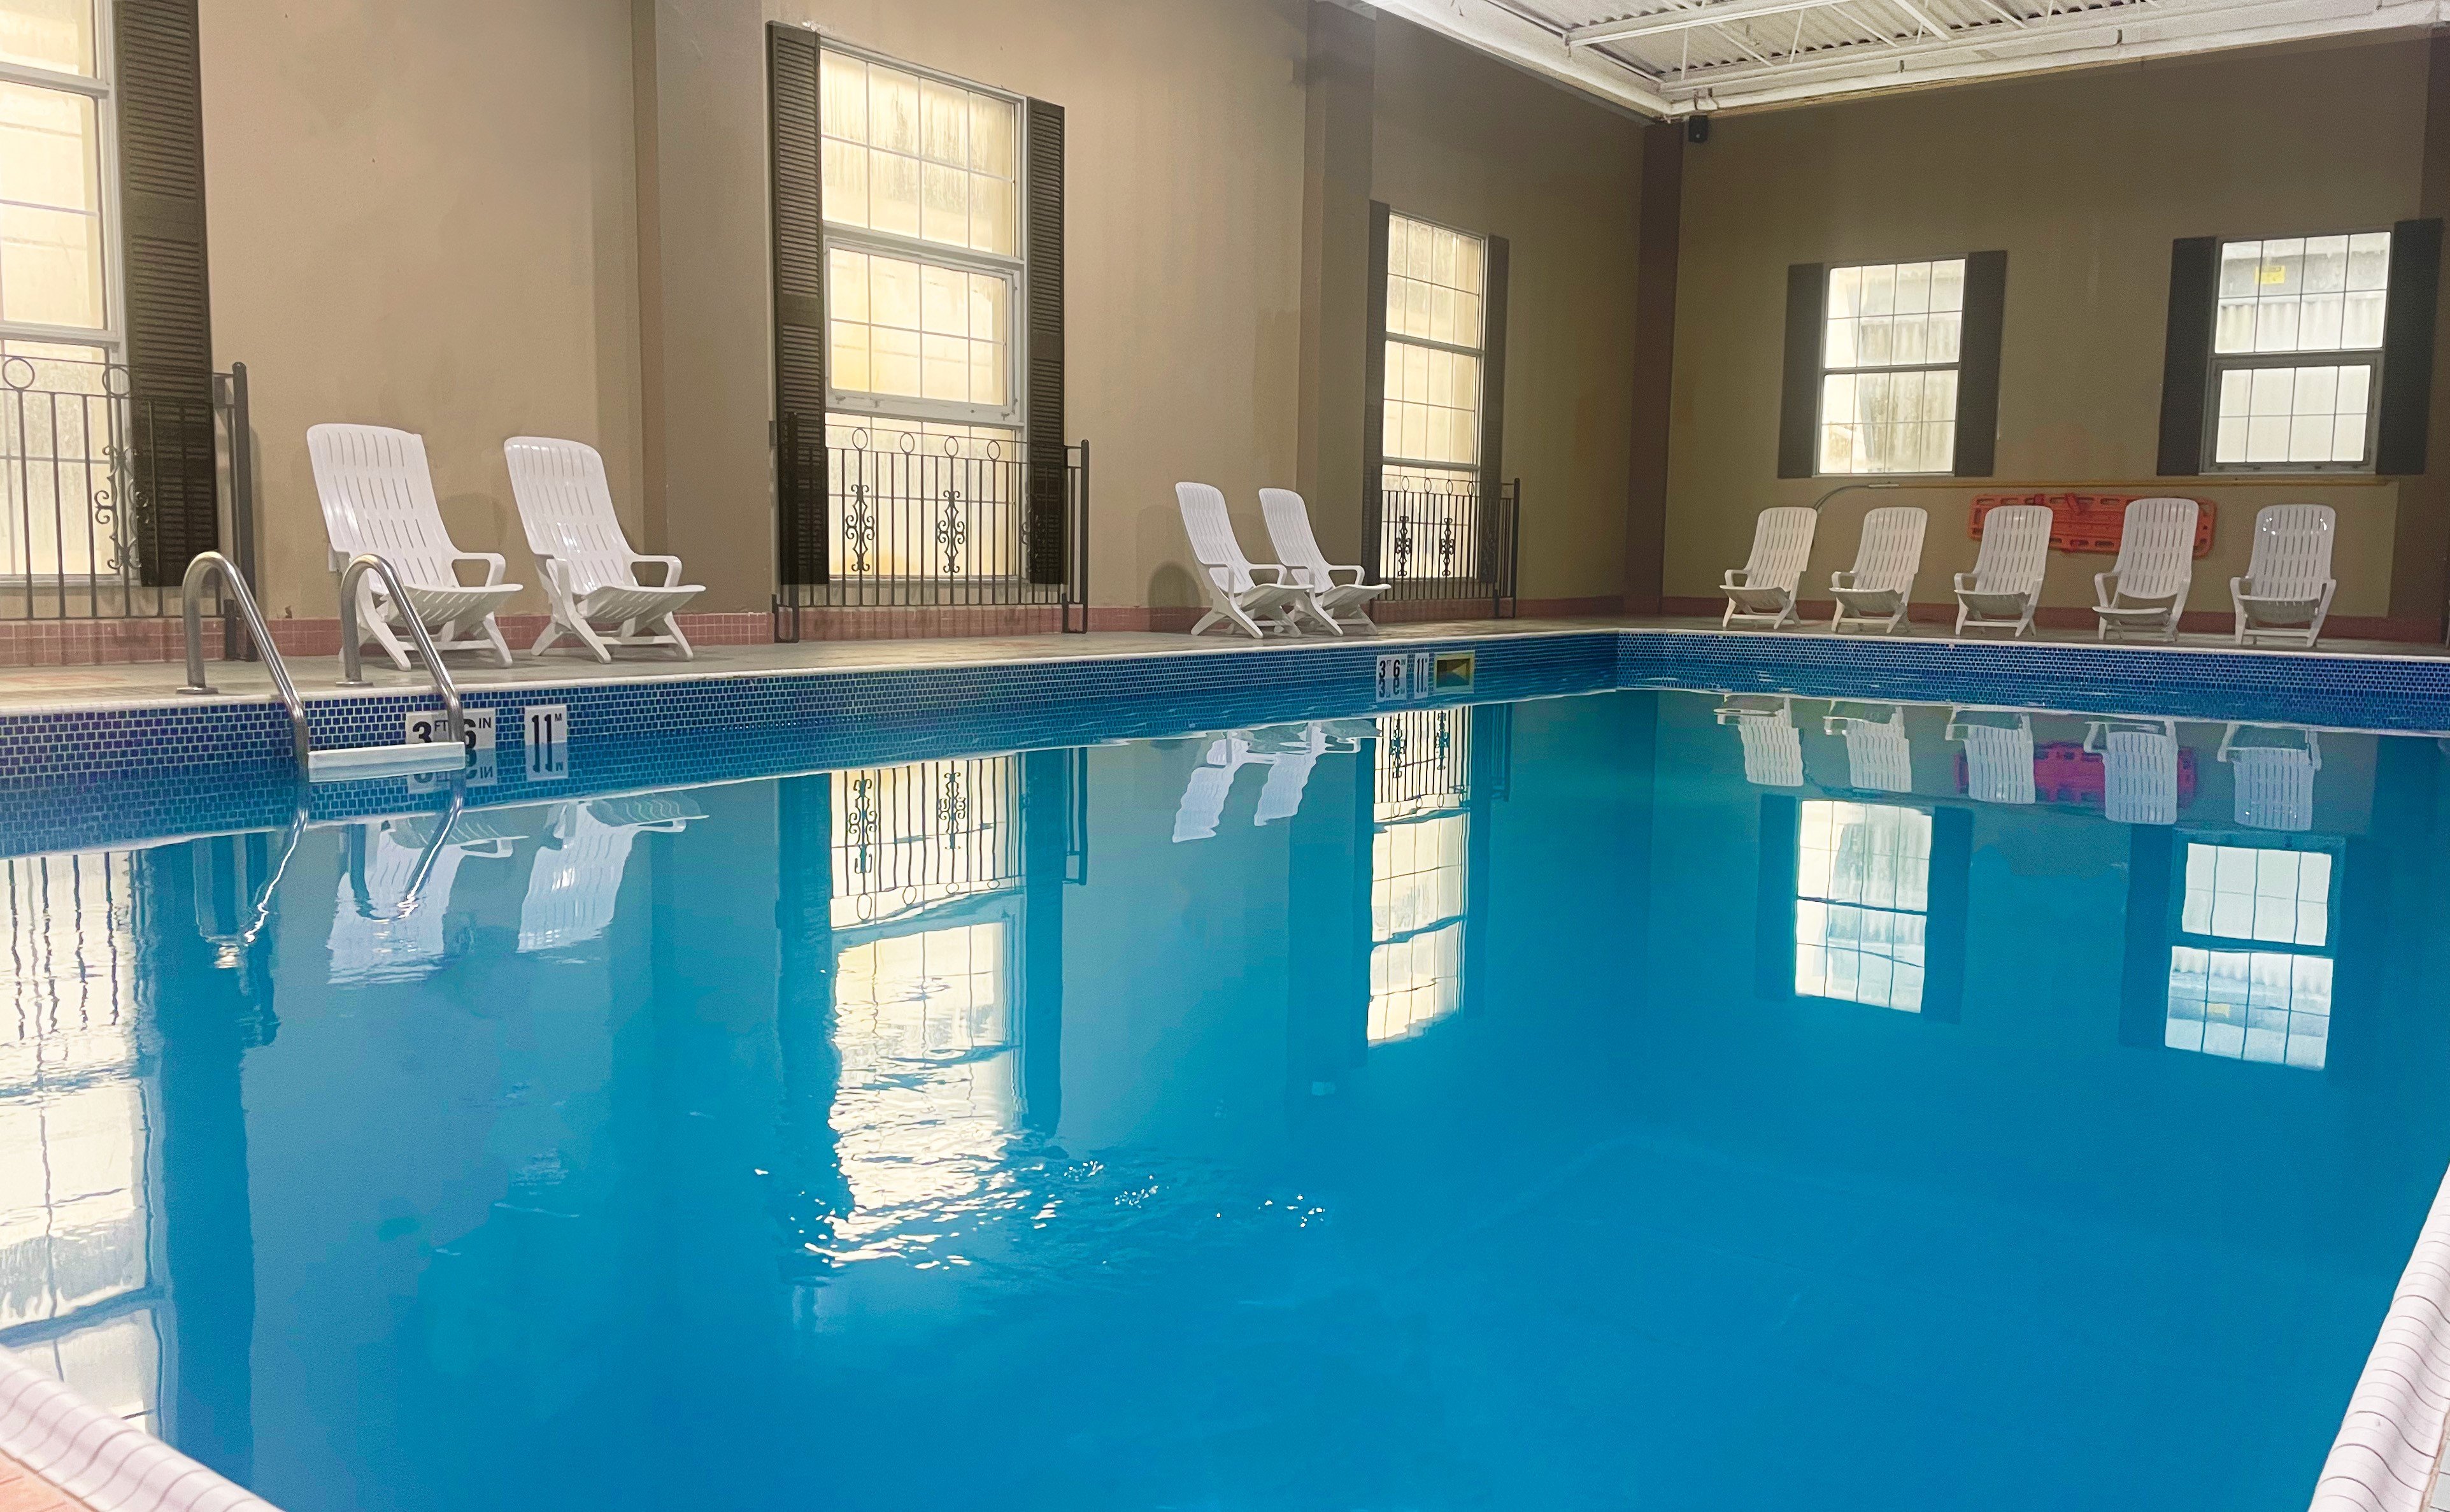 Enjoy our large heated indoor swimming pool